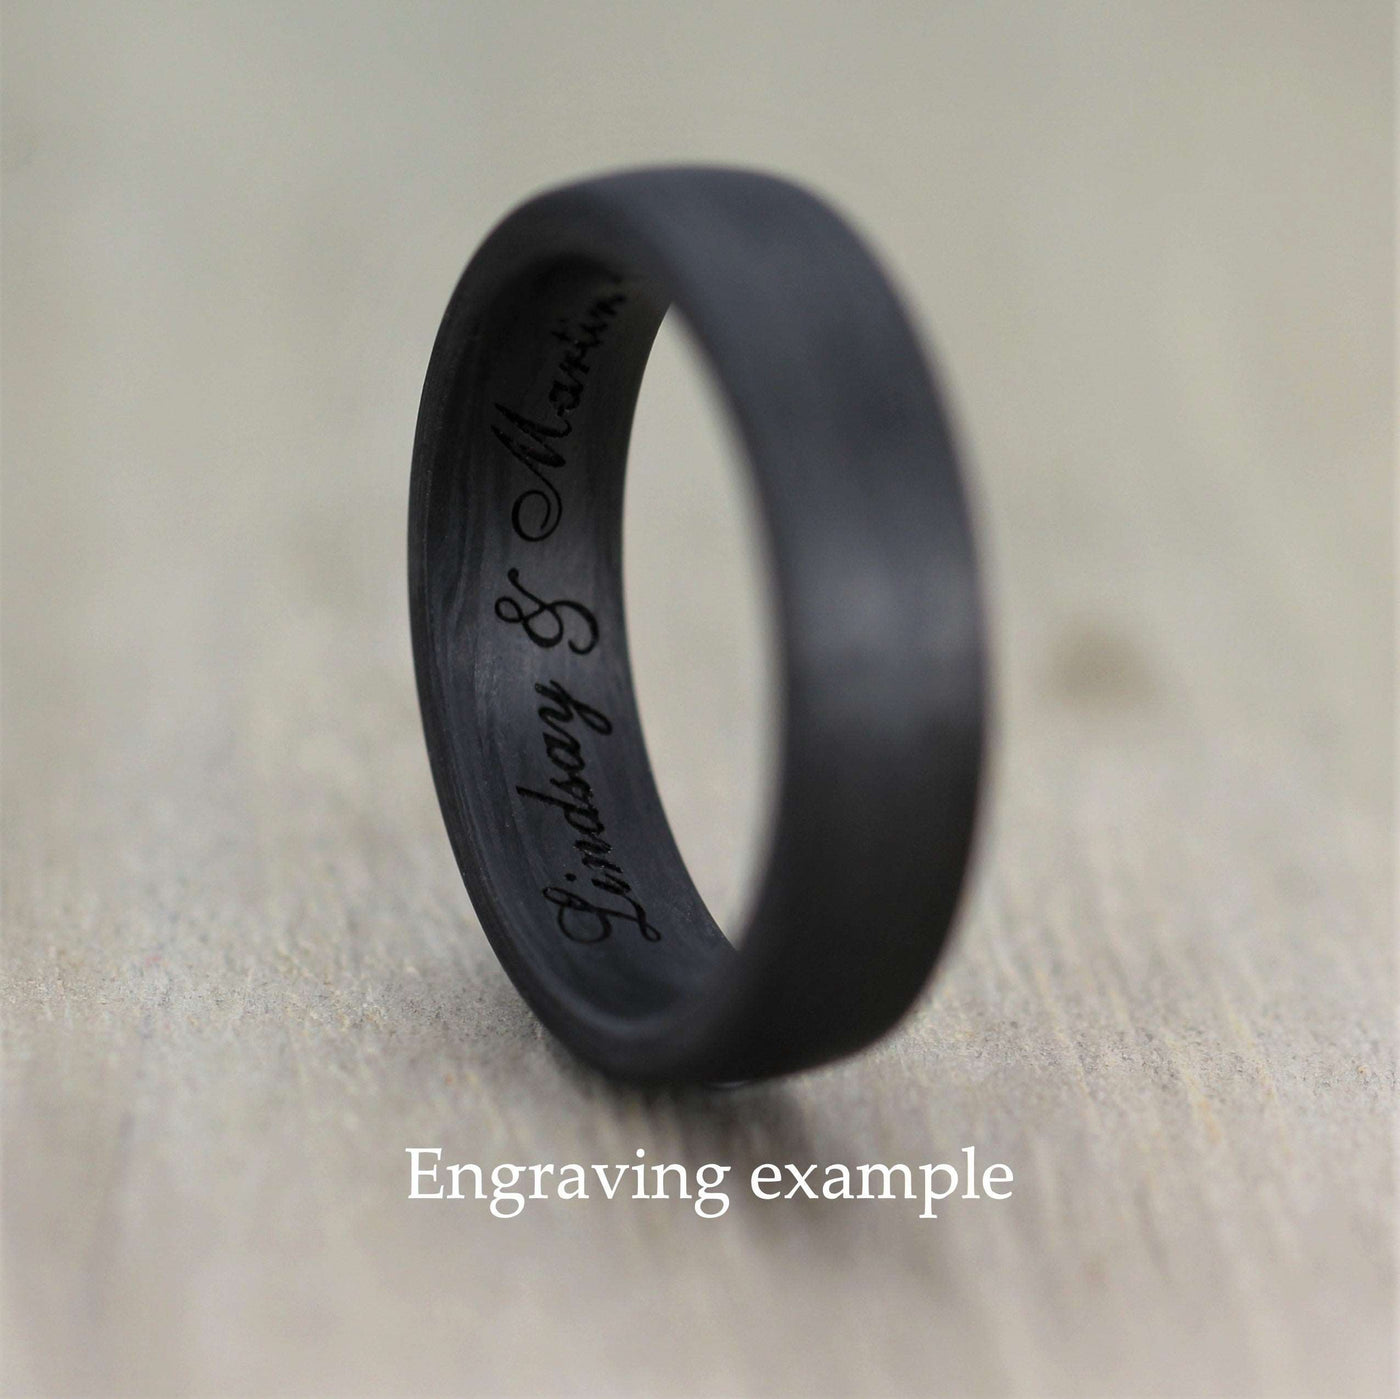 Carbon Fibre, Domed Wedding Ring, Comfort fit & FREE Engraving! (7 to 9mm)